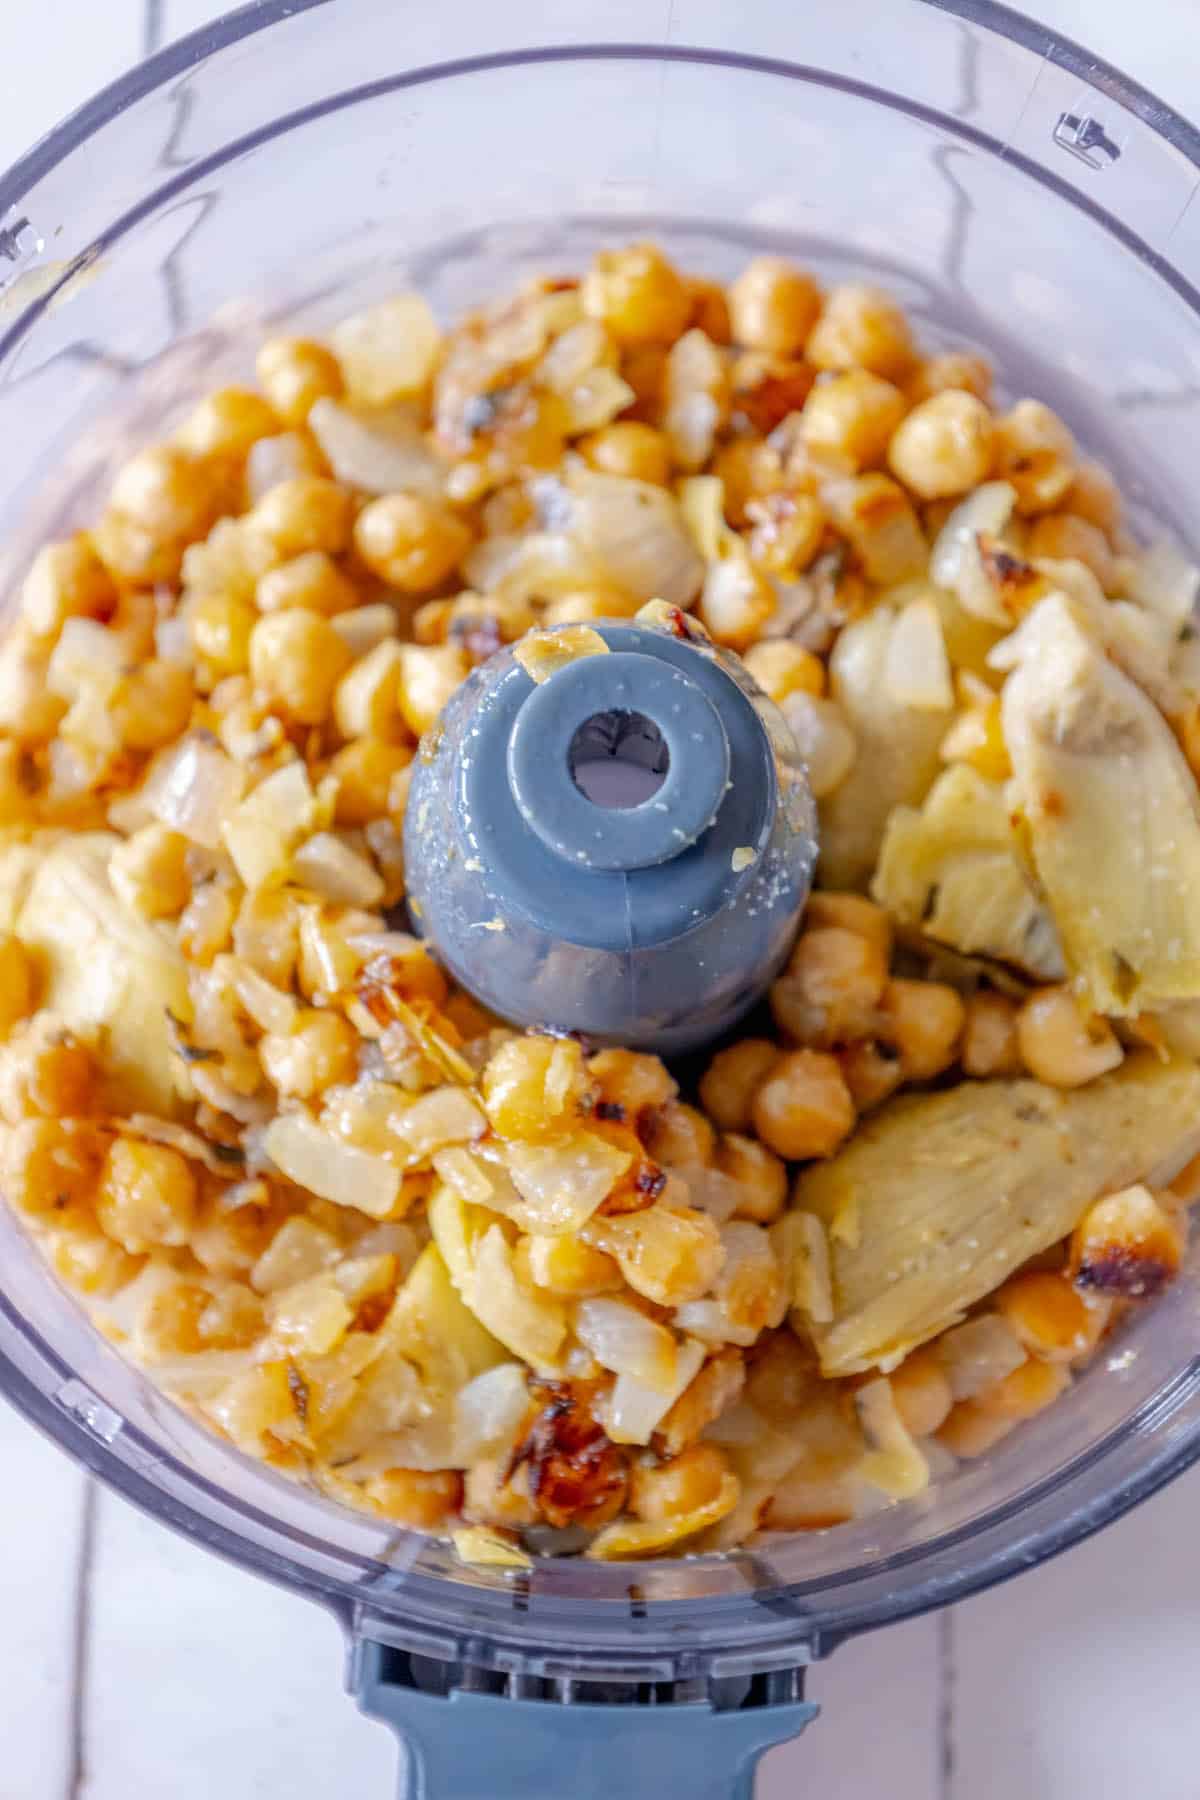 Roasted chickpeas in a food processor.